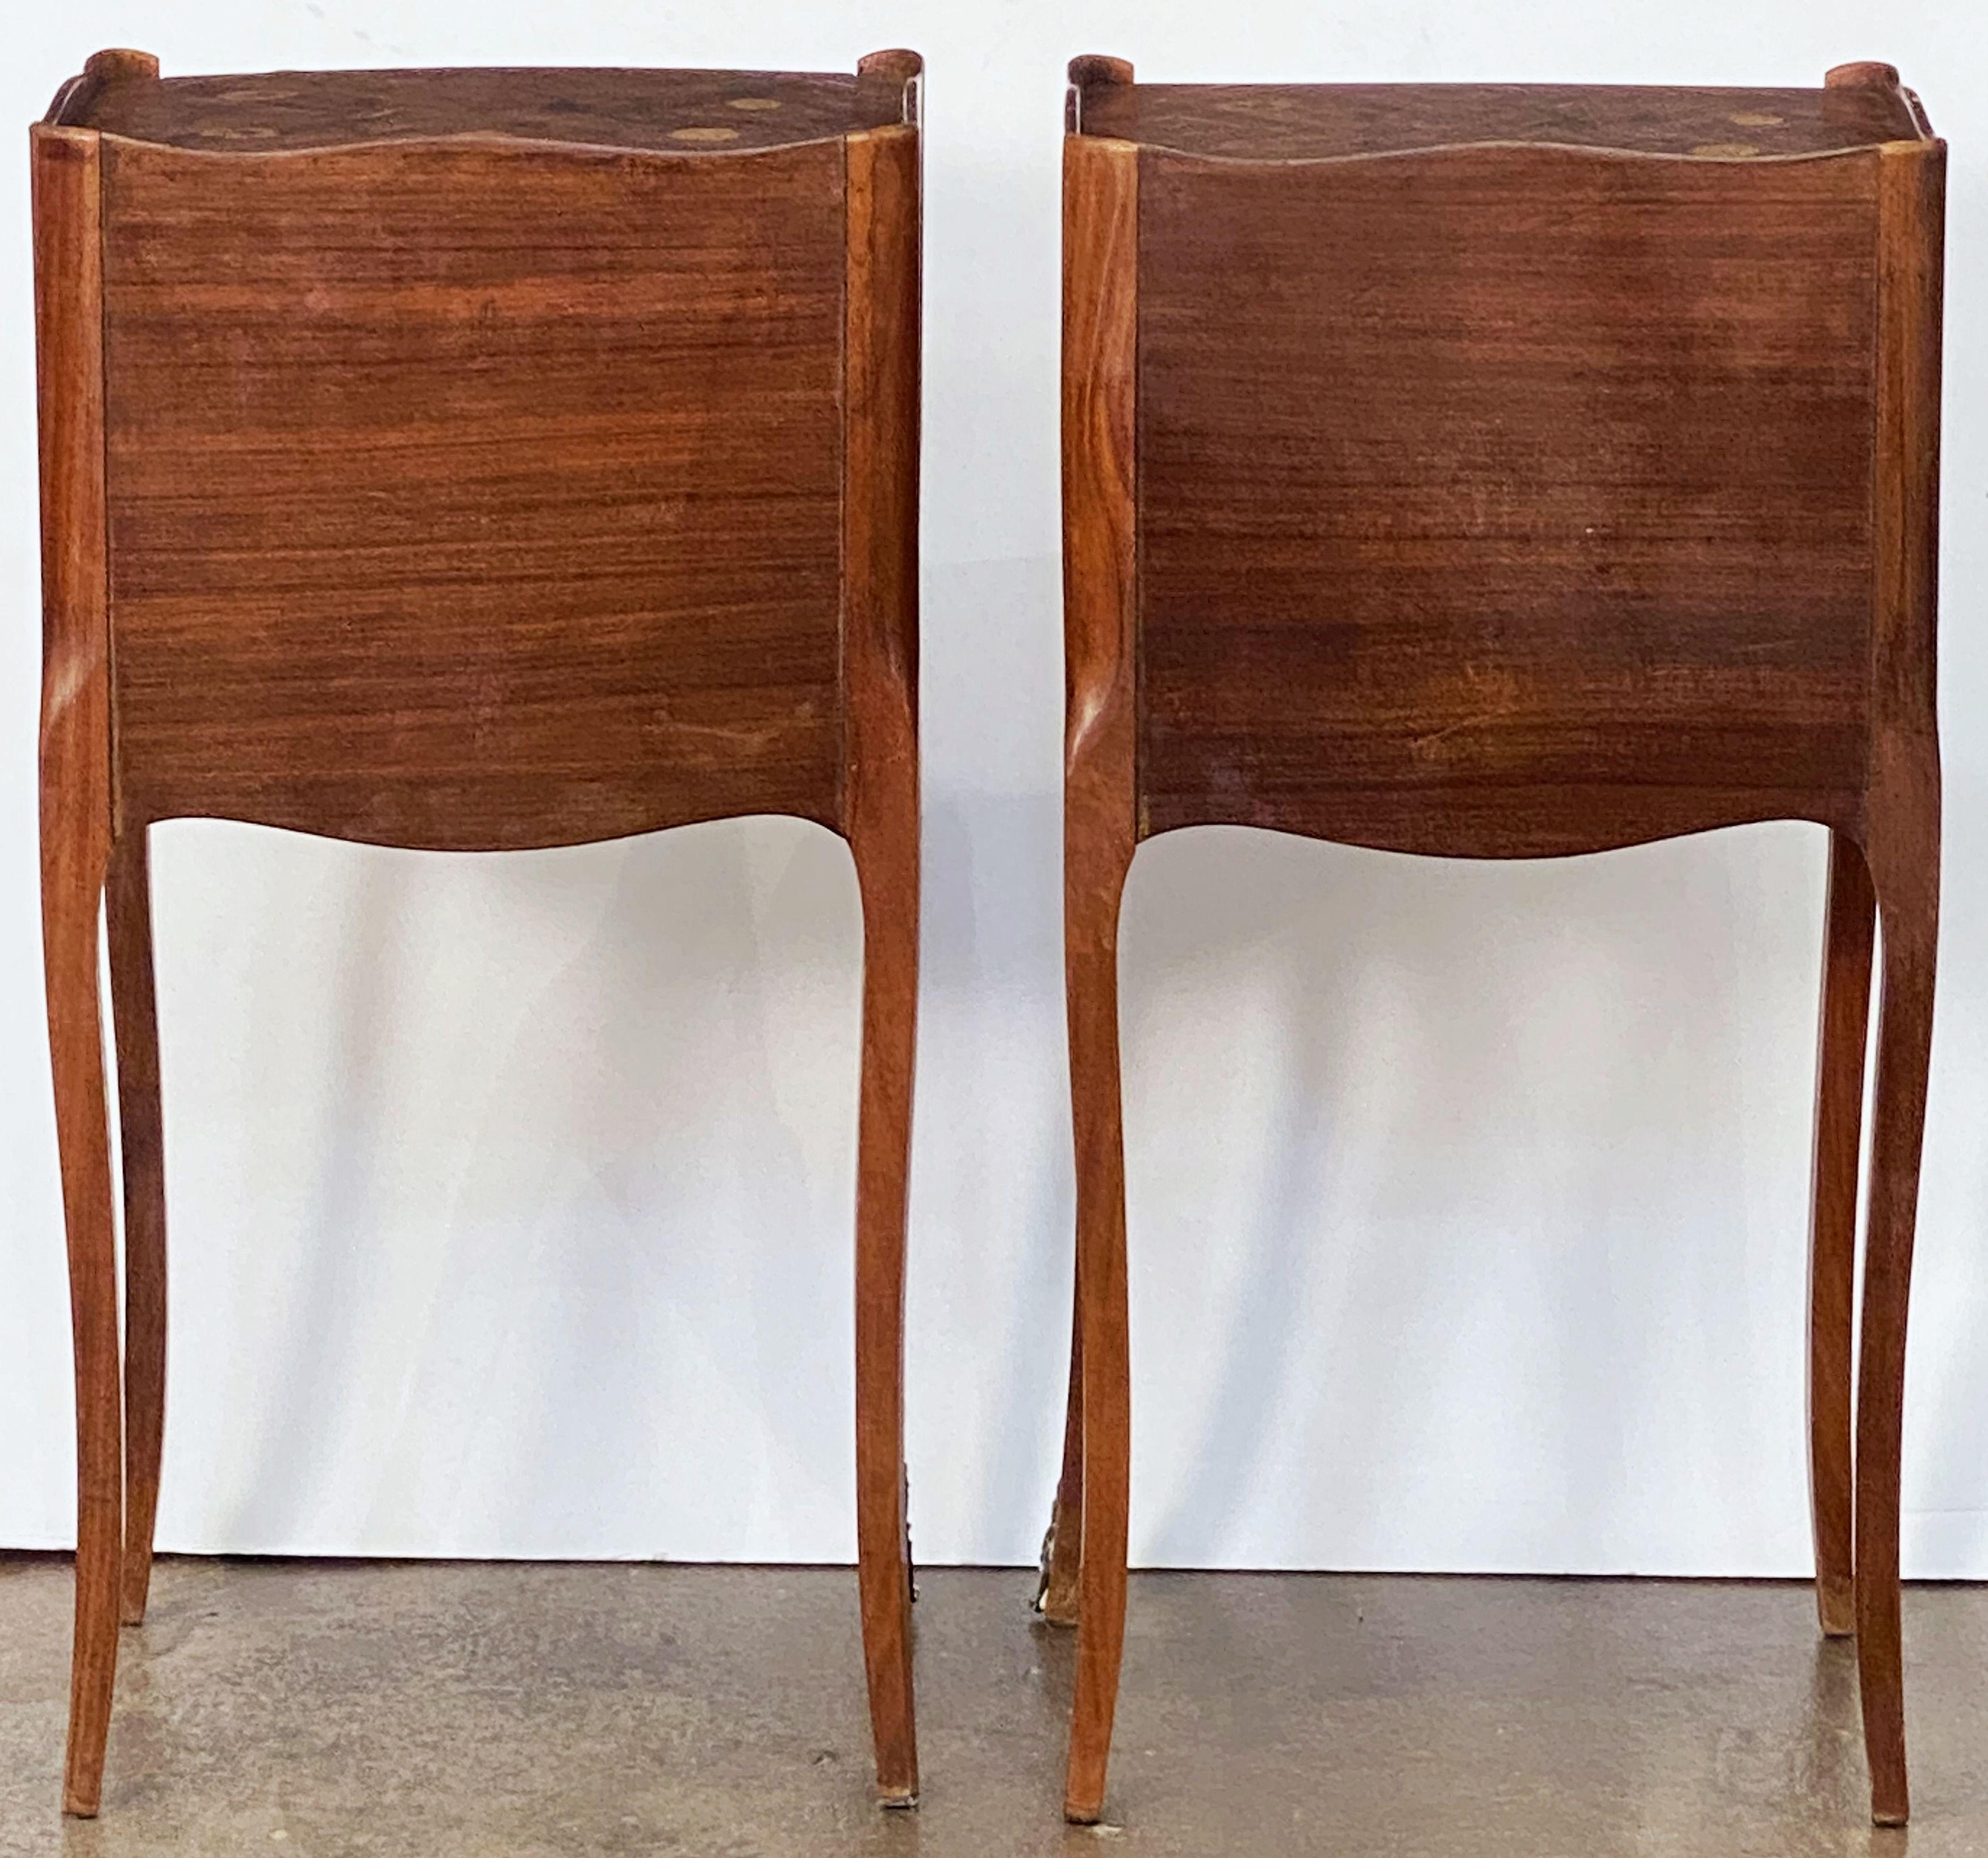 Pair of French Inlaid Bedside Tables or Nightstands on Cabriole Legs 14